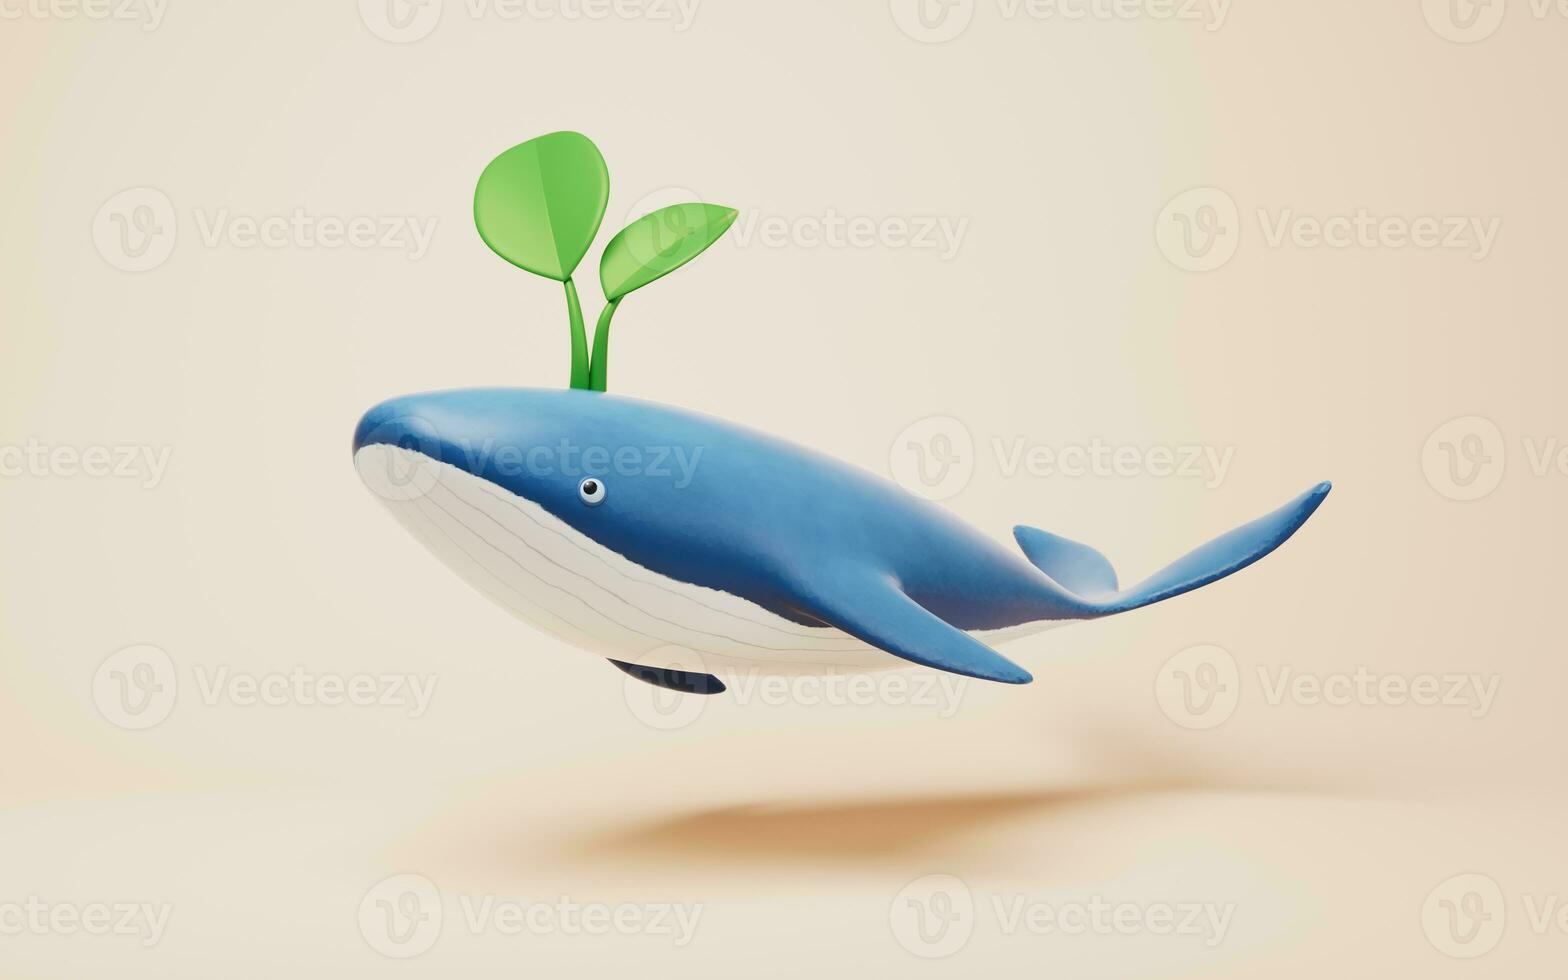 Blue whale with a green Leaf on its head, 3d rendering. photo